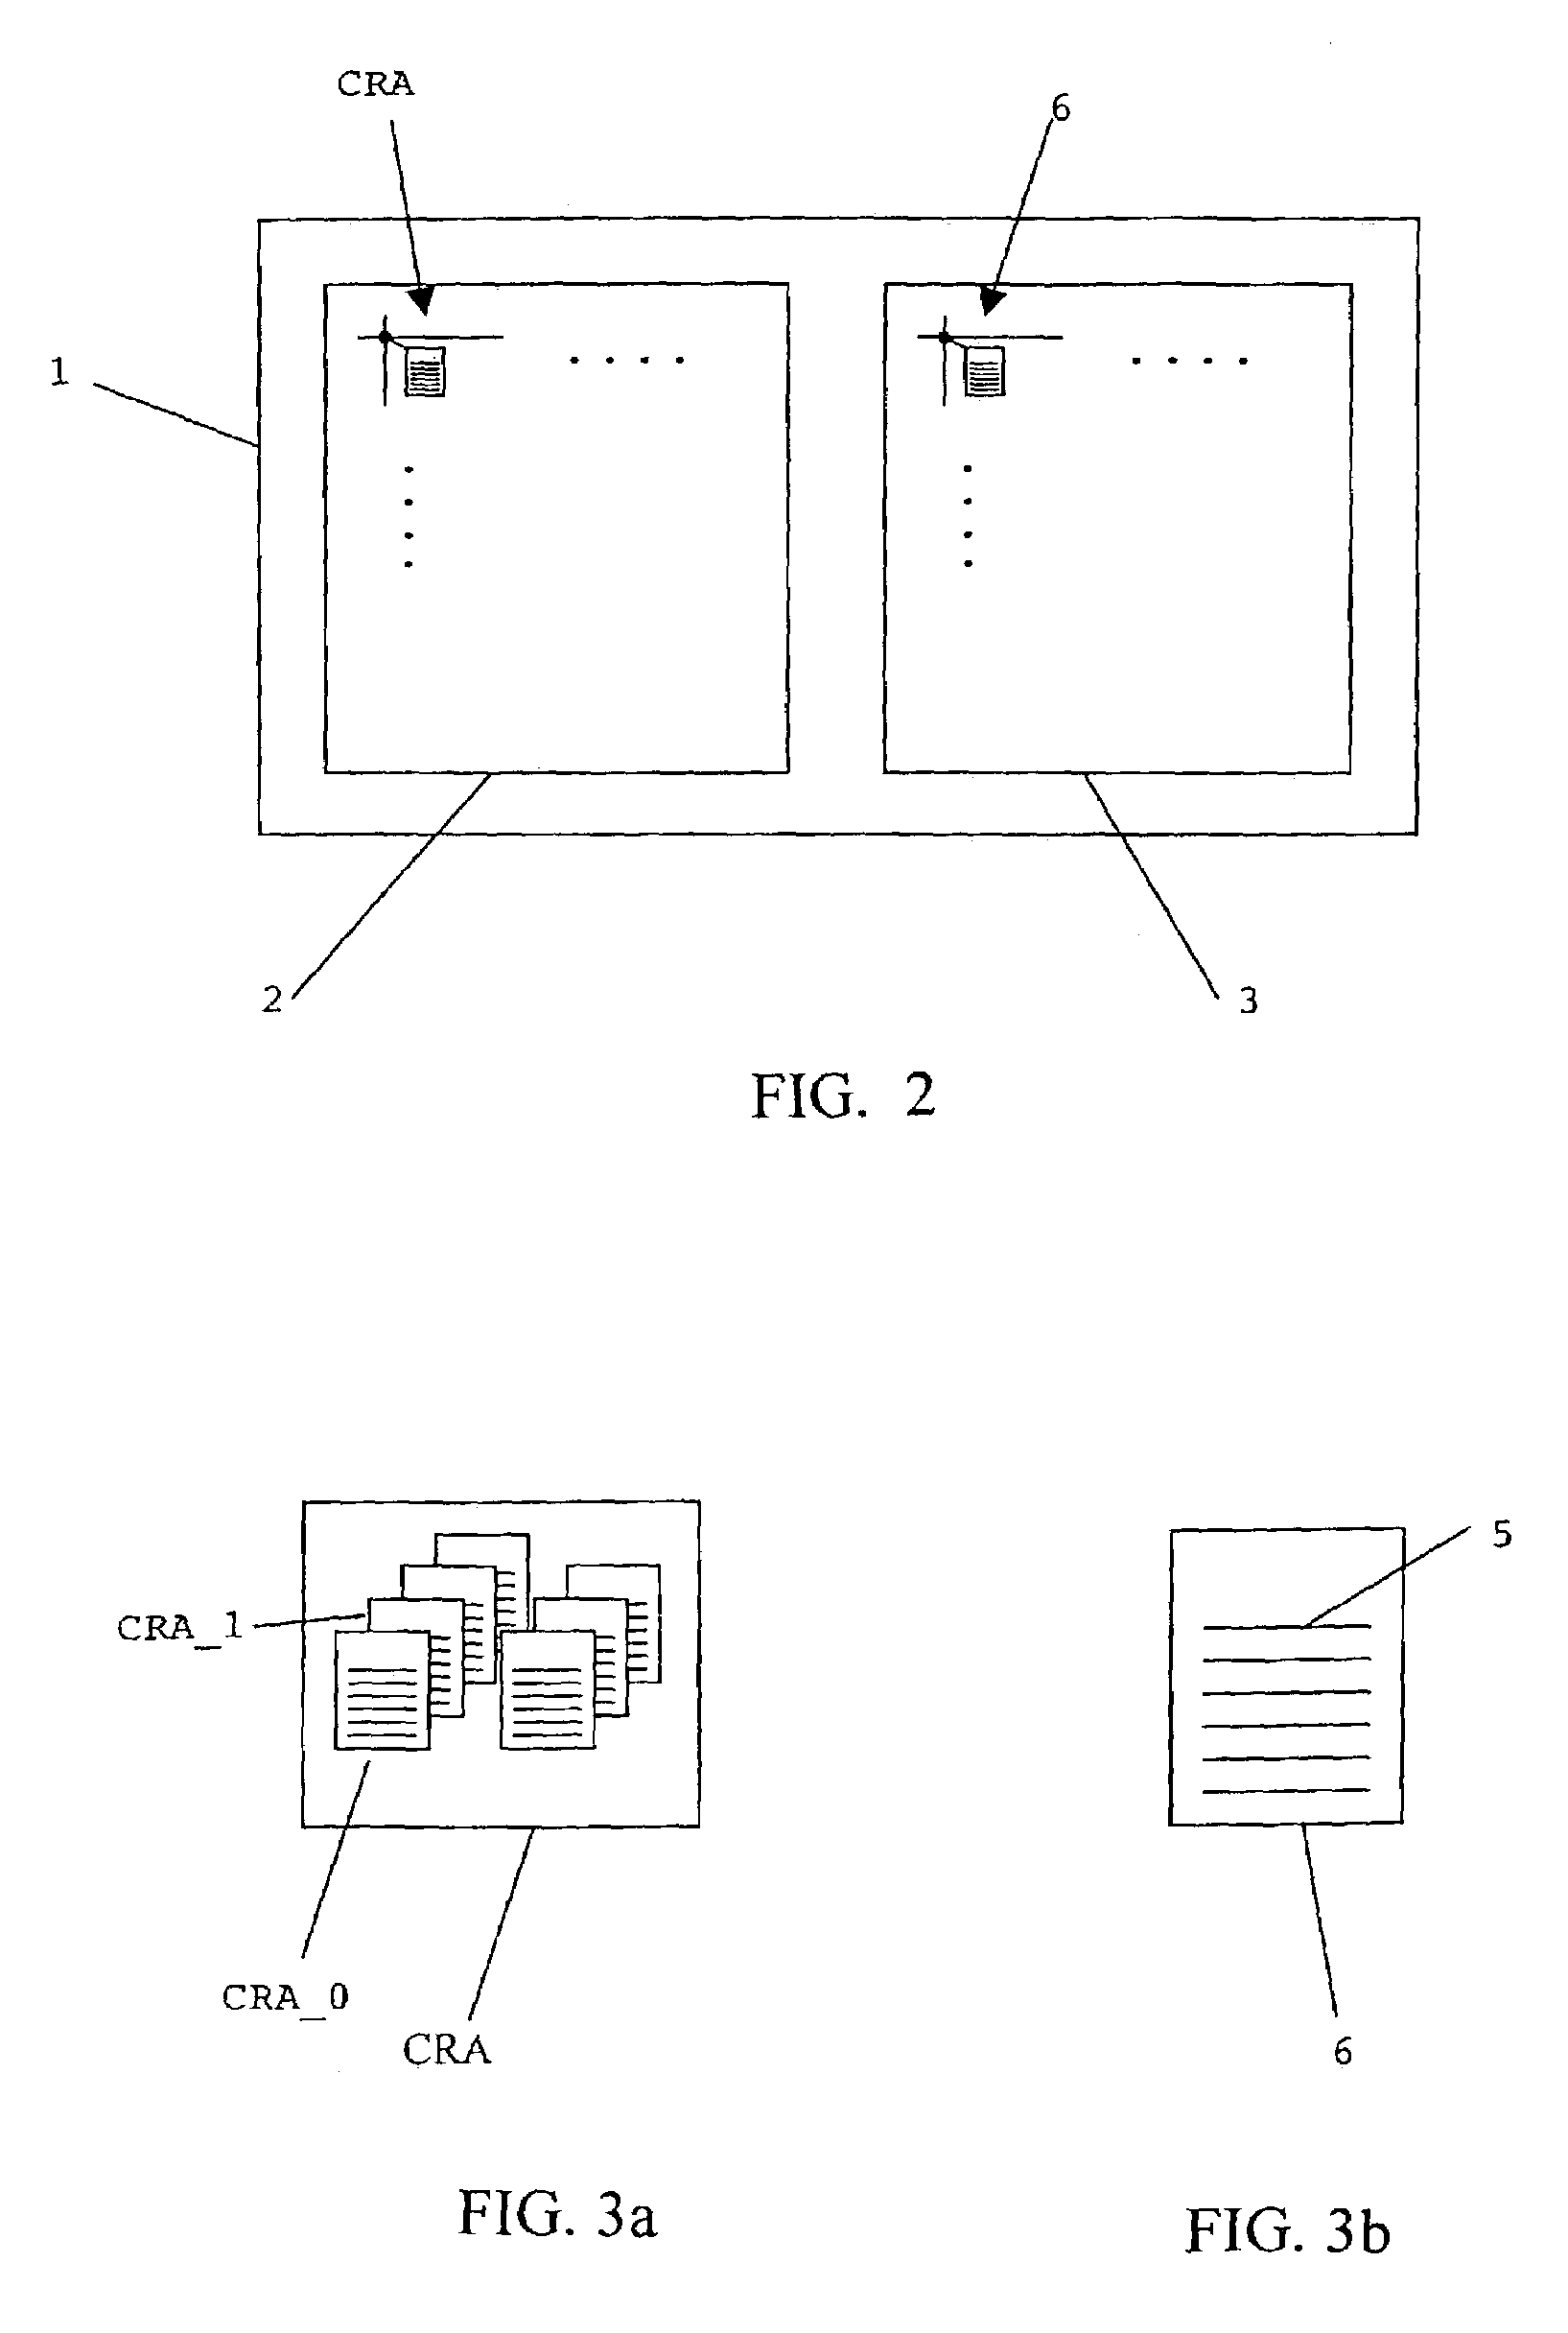 Method of operating a crossbar switch